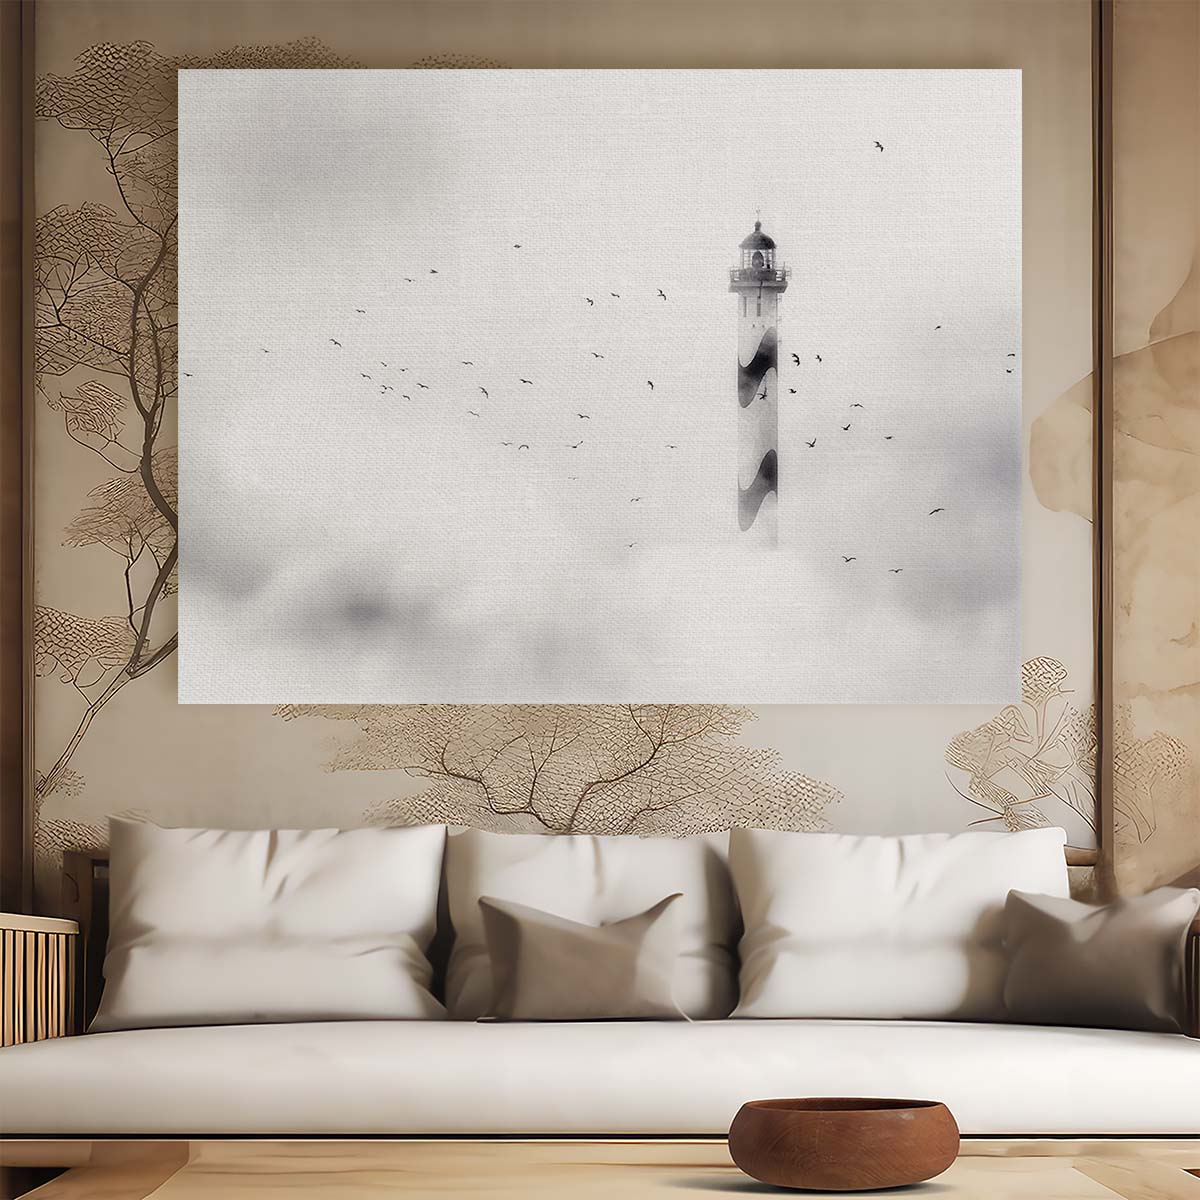 Foggy Ostend Lighthouse & Birds Monochrome Seascape Wall Art by Luxuriance Designs. Made in USA.